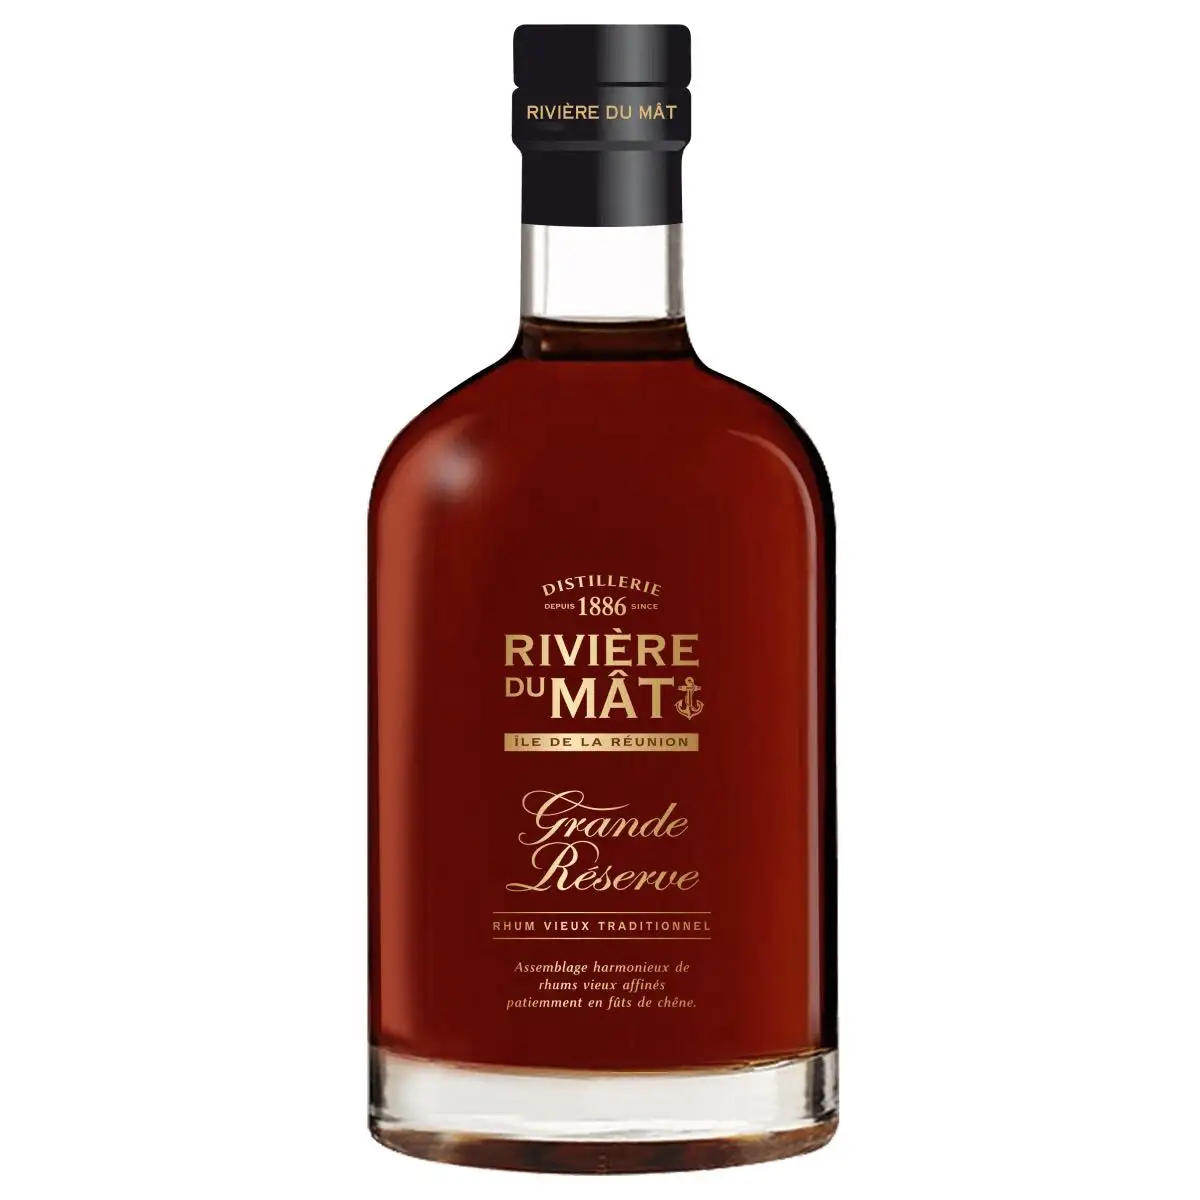 Image of the front of the bottle of the rum Grande Réserve